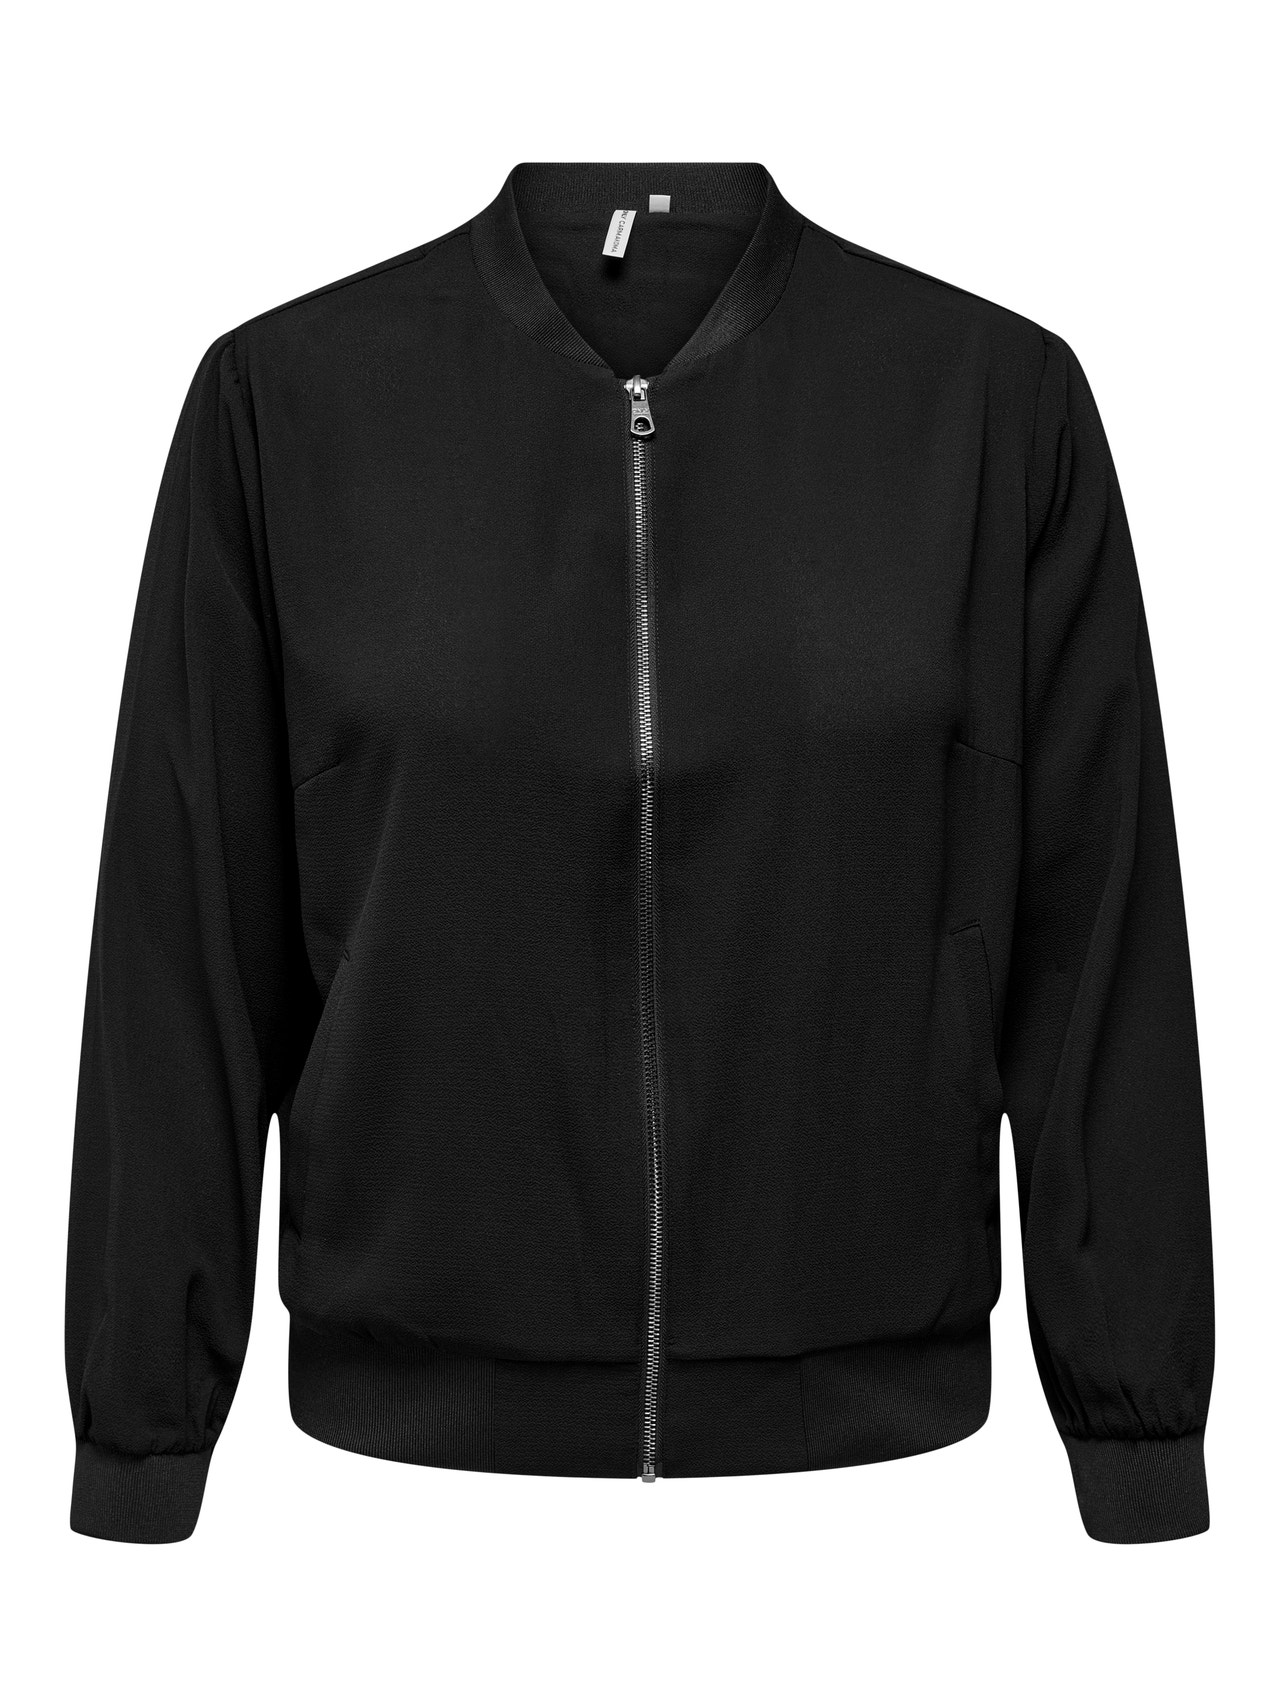 ONLY Spread collar Ribbed cuffs Otw Bomber -Black - 15250912